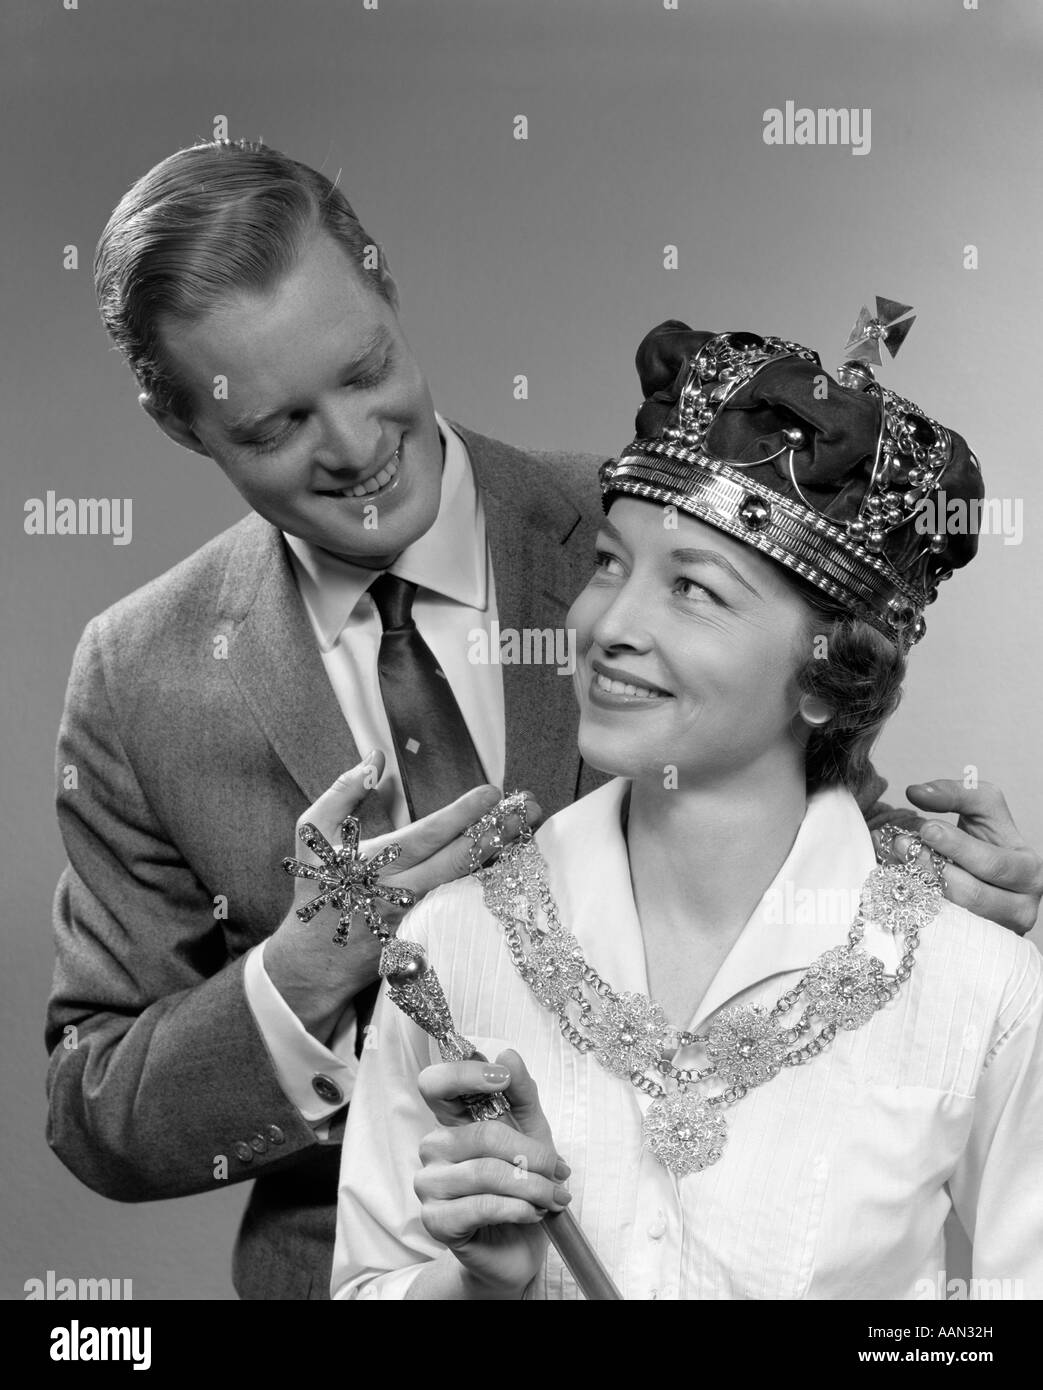 1950s MAN HOLDING ROYAL NECKLACE ON WOMAN WEARING CROWN AND HOLDING SCEPTER Stock Photo